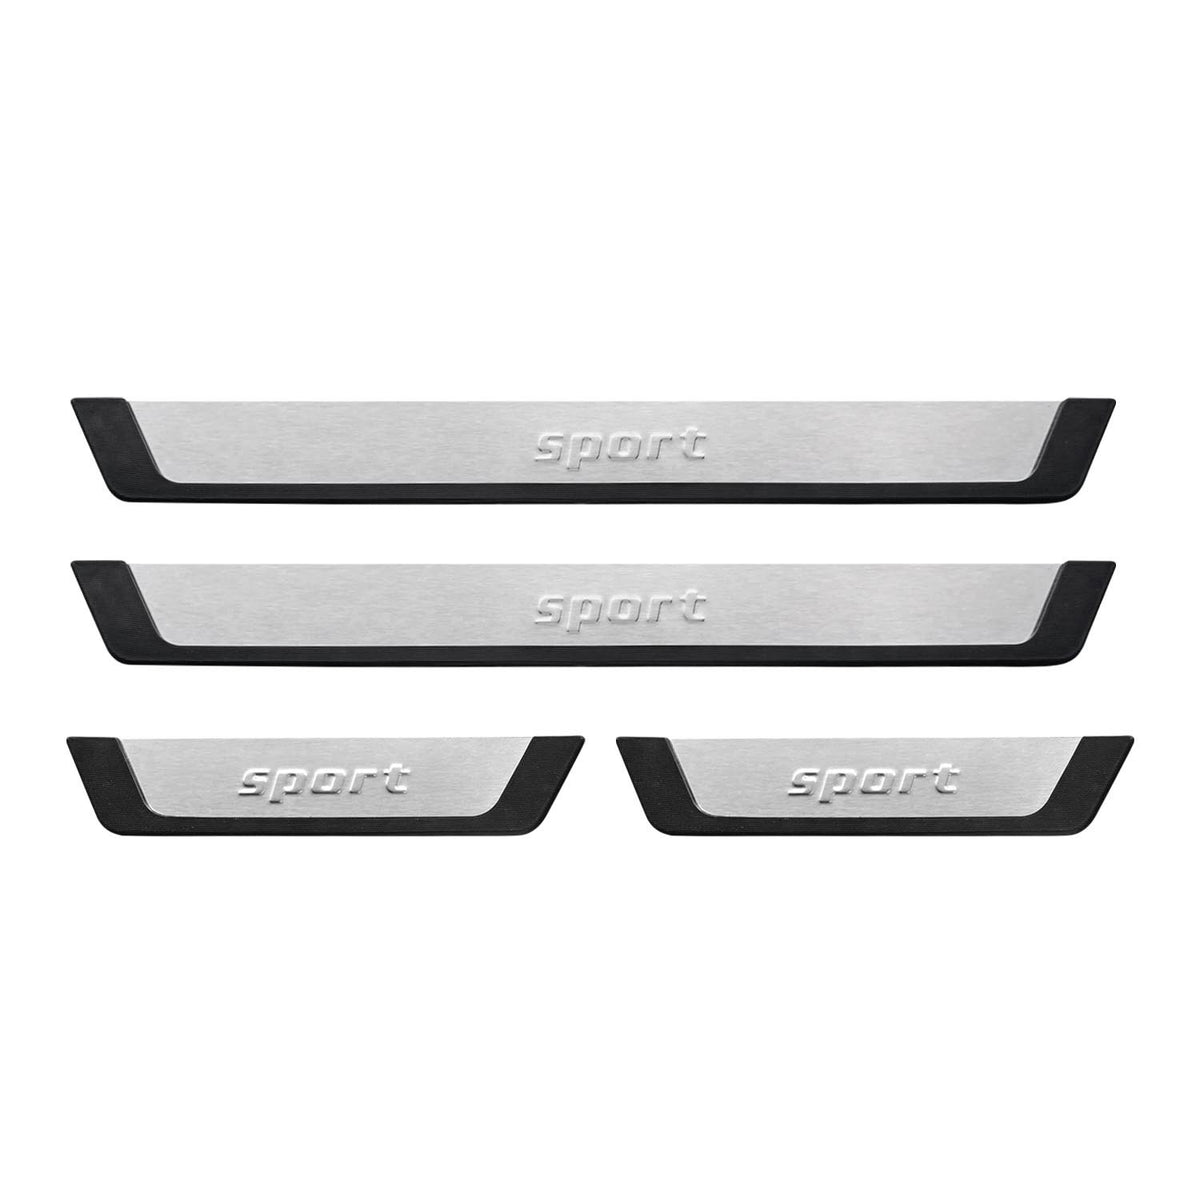 Door sills Sport for BMW 3 Series 4 Series 5 Series 6 Series 7 Series X1 Brushed Chrome 4x